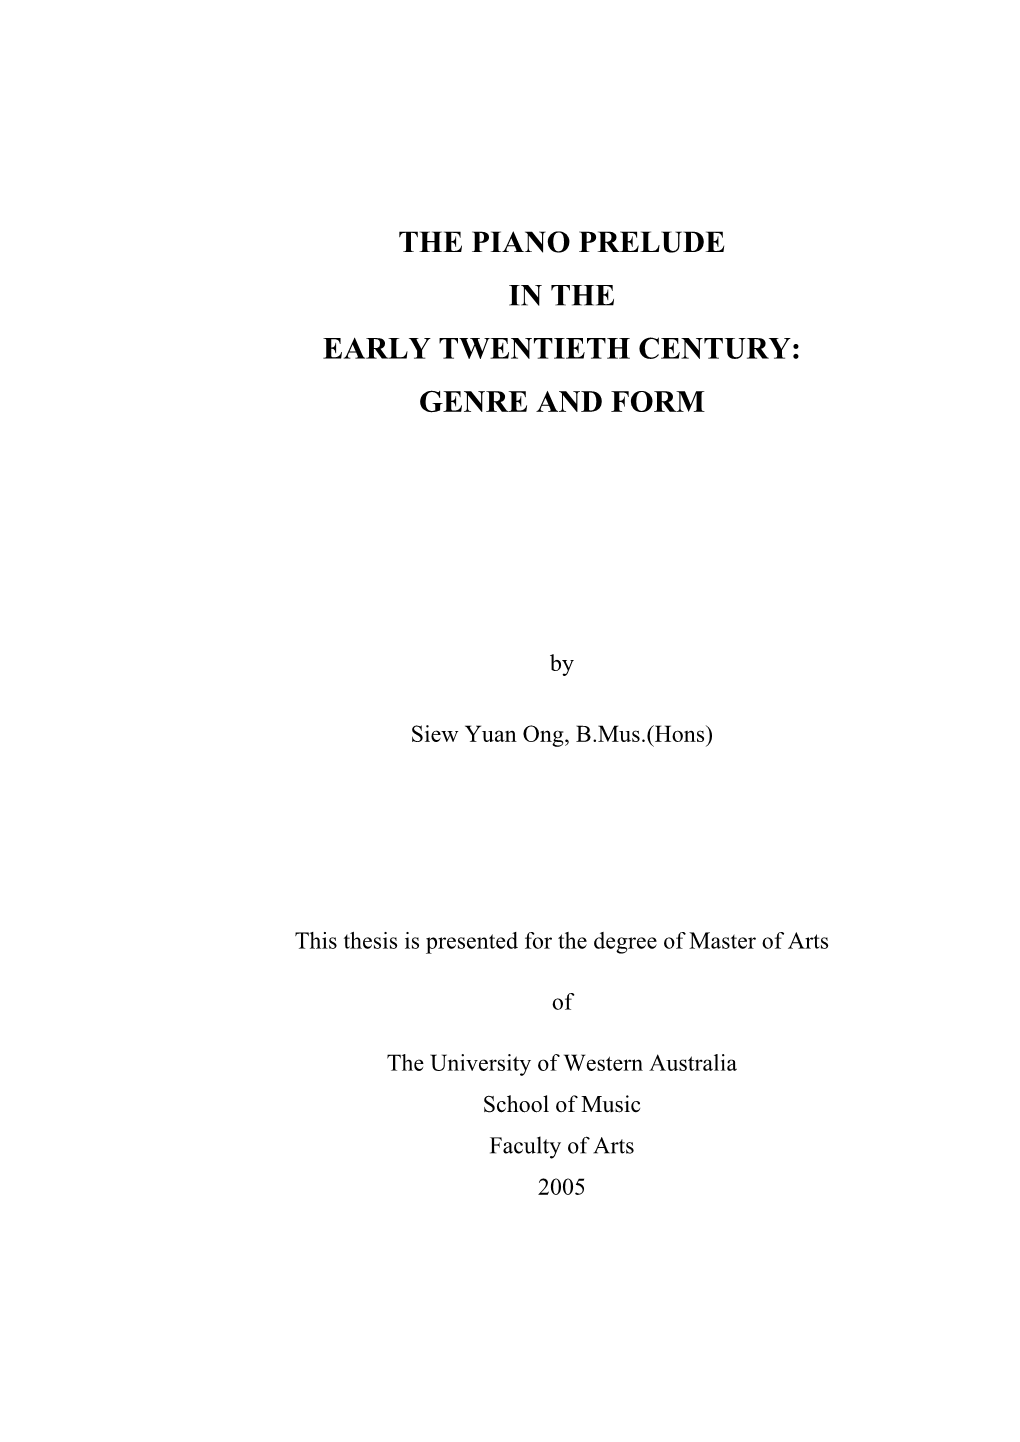 The Piano Prelude in the Early Twentieth Century: Genre and Form